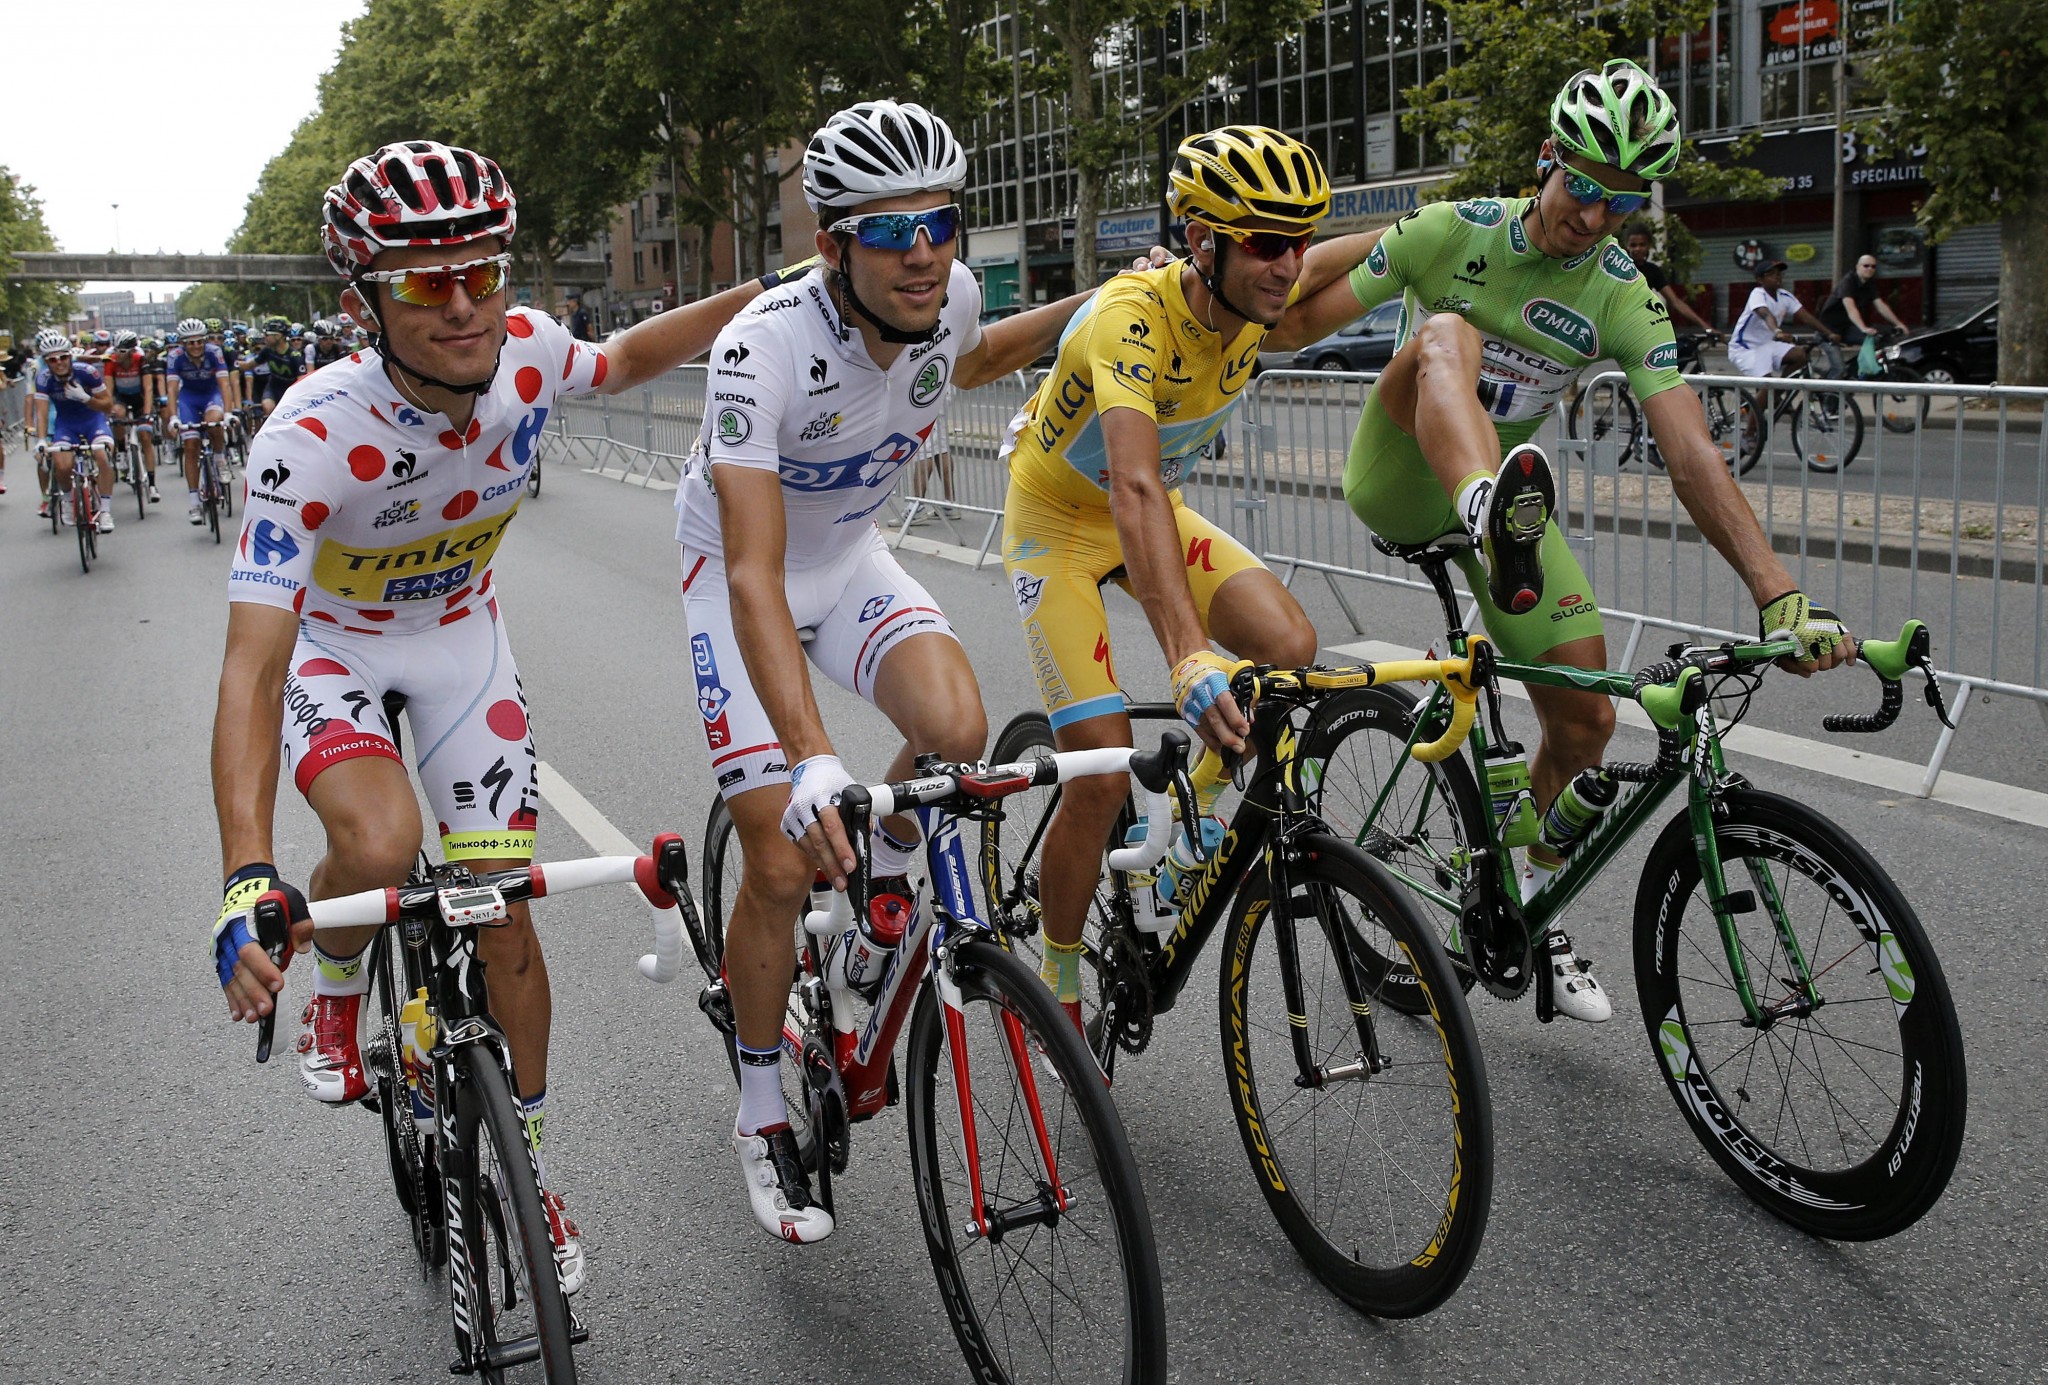 Vincenzo Nibali (in yellow) on a Specialized Tarmac during the final stage of the 2014 Tour de France. Other riders are Rafal Majka (best climber), Thibaut Pinot (best young rider), and Peter Sagan (best sprinter).